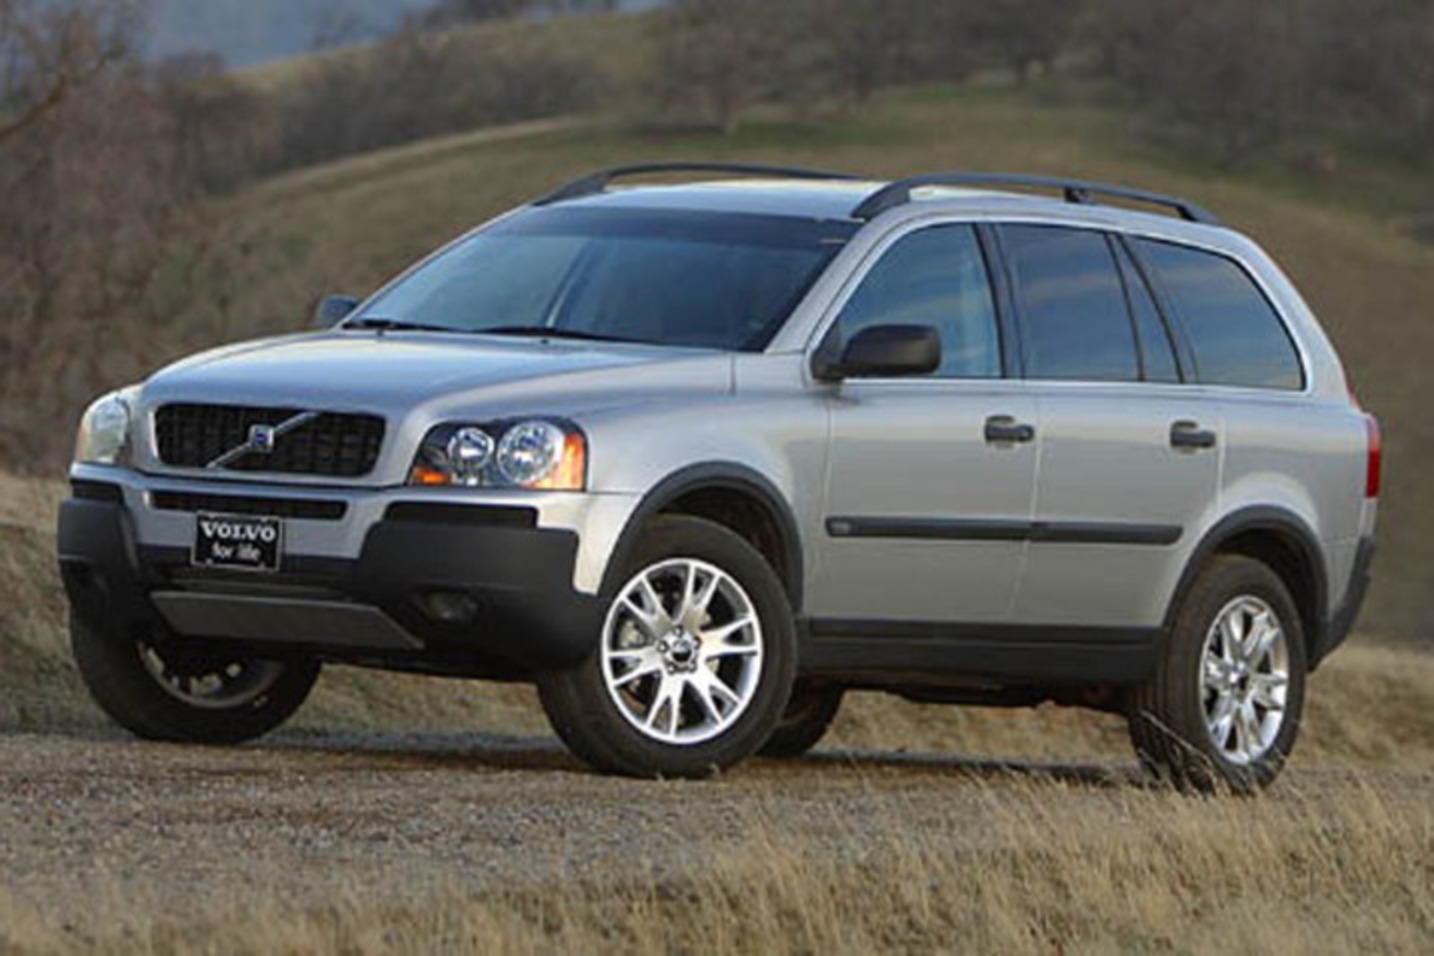 Volvo XC90 29L. View Download Wallpaper. 717x478. Comments